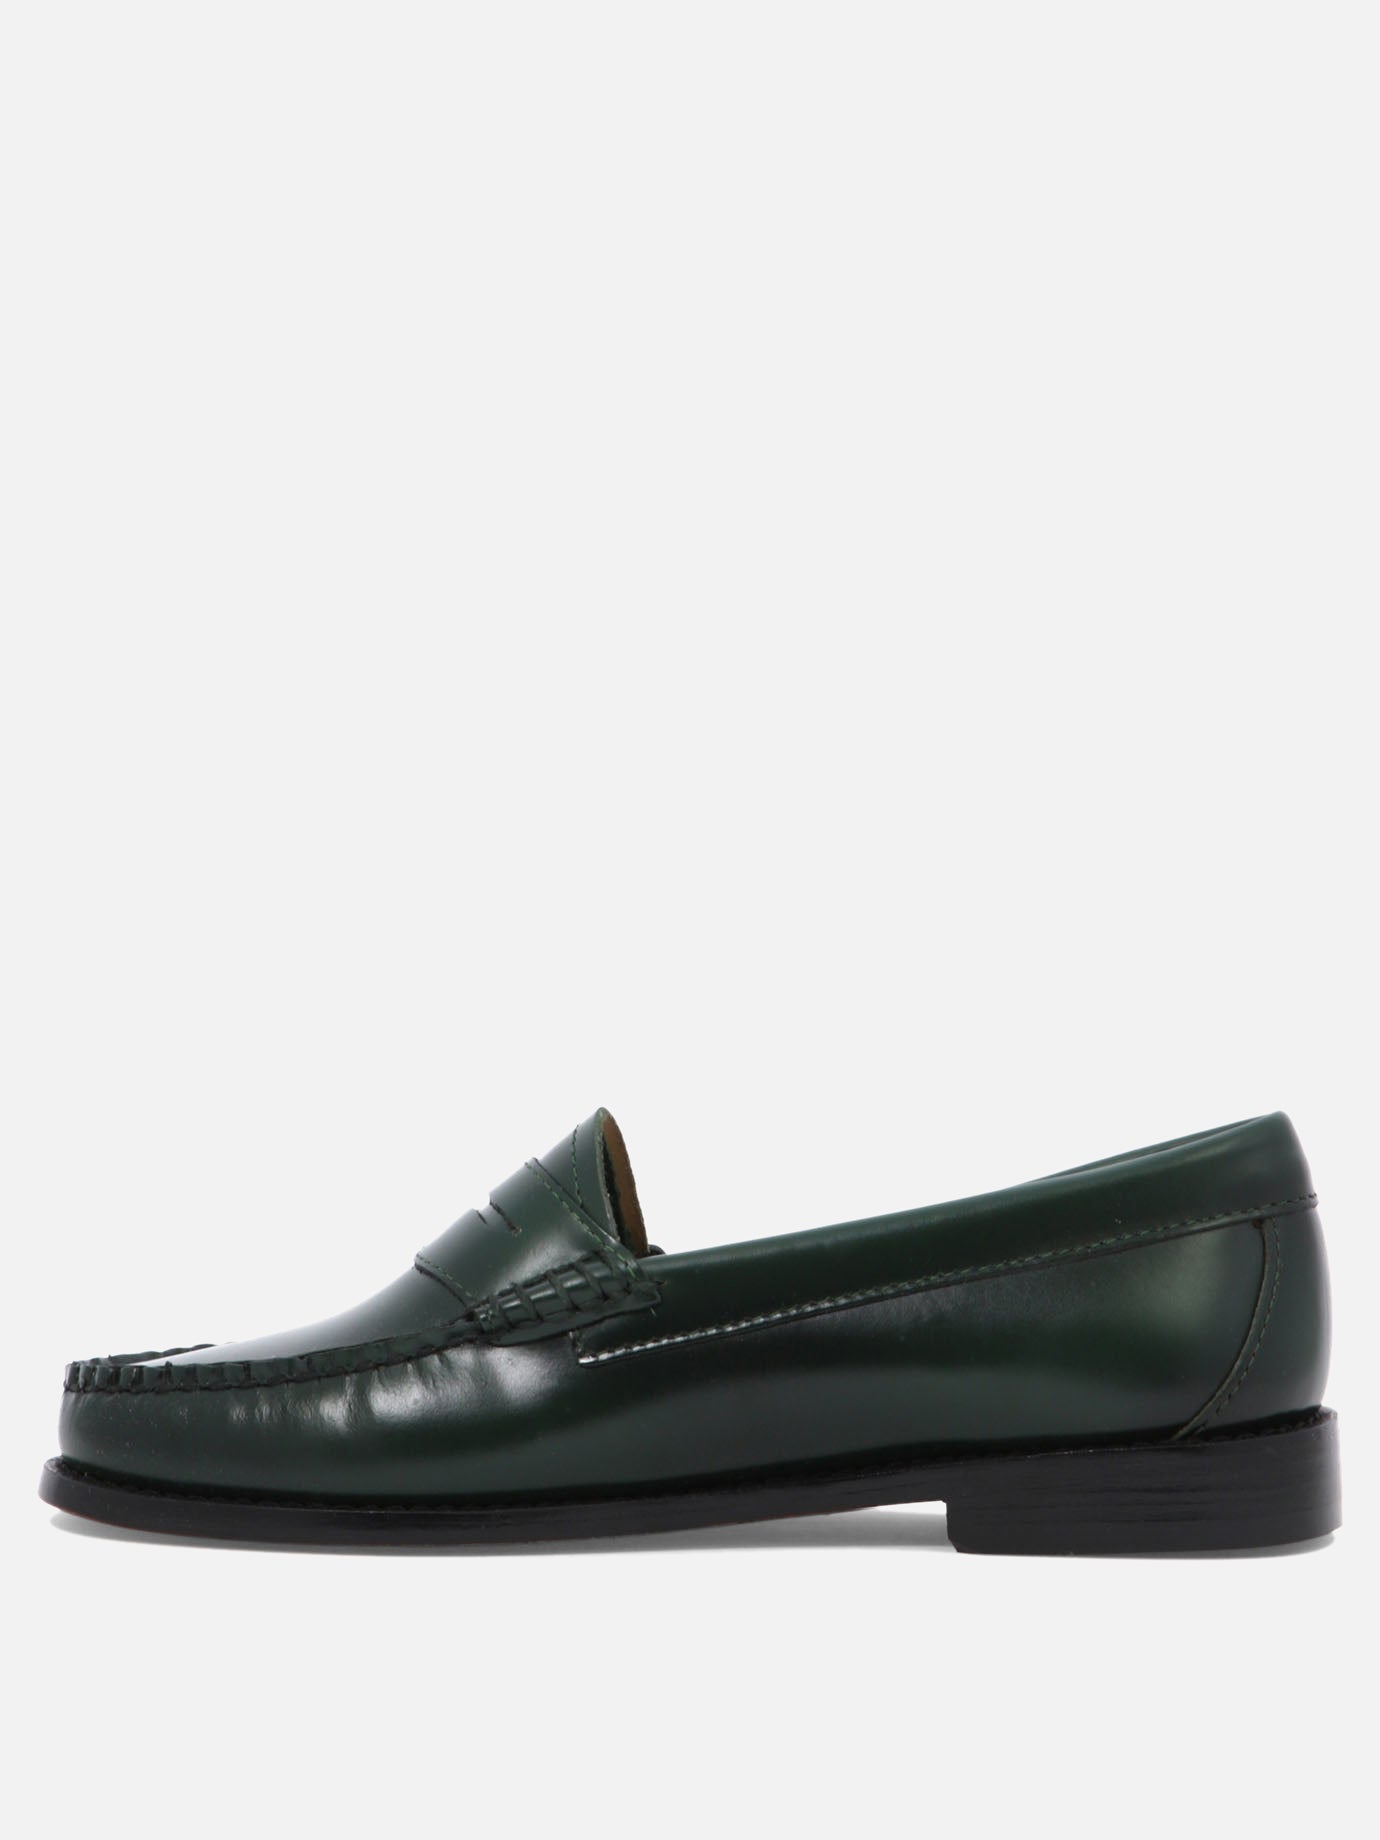 "Weejuns Penny" loafers